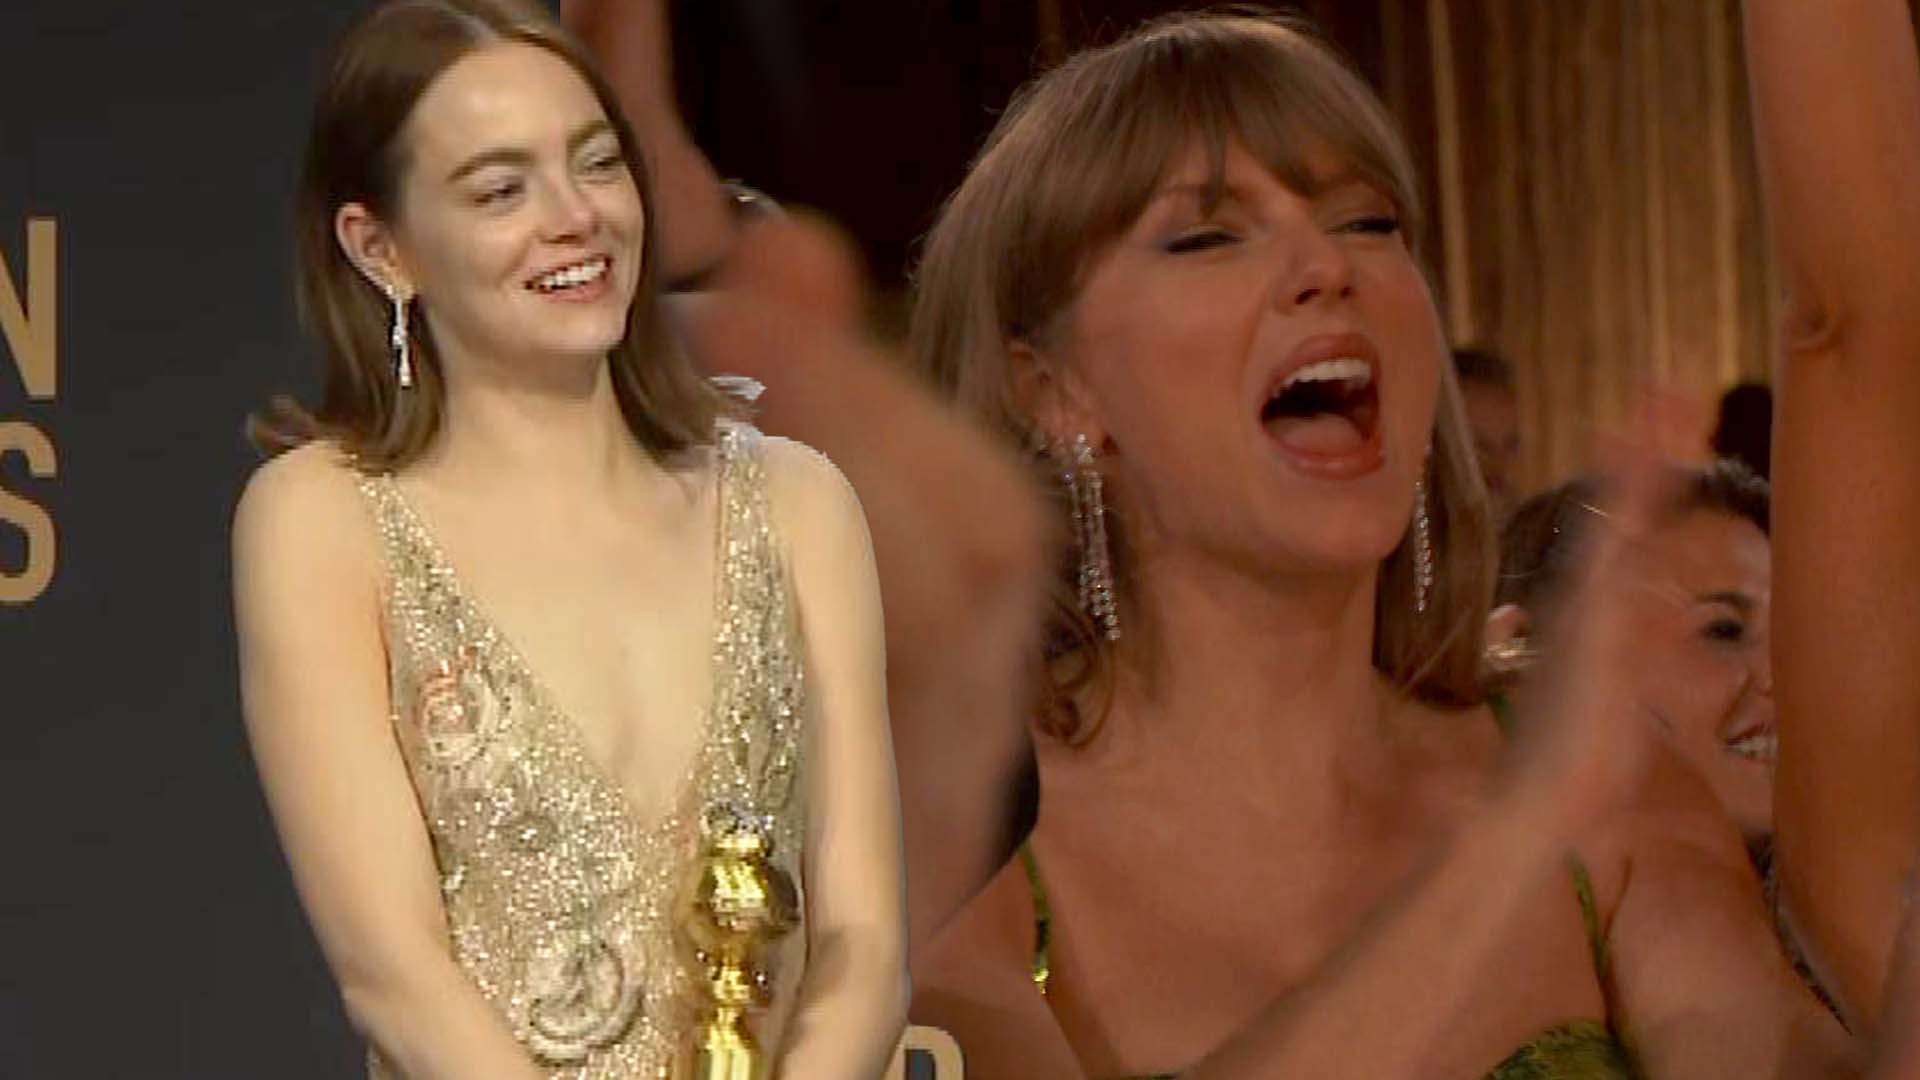 Emma Stone Quotes Taylor Swift in Emotional Shout-Out to Her Daughter in  Oscars Speech | Entertainment Tonight